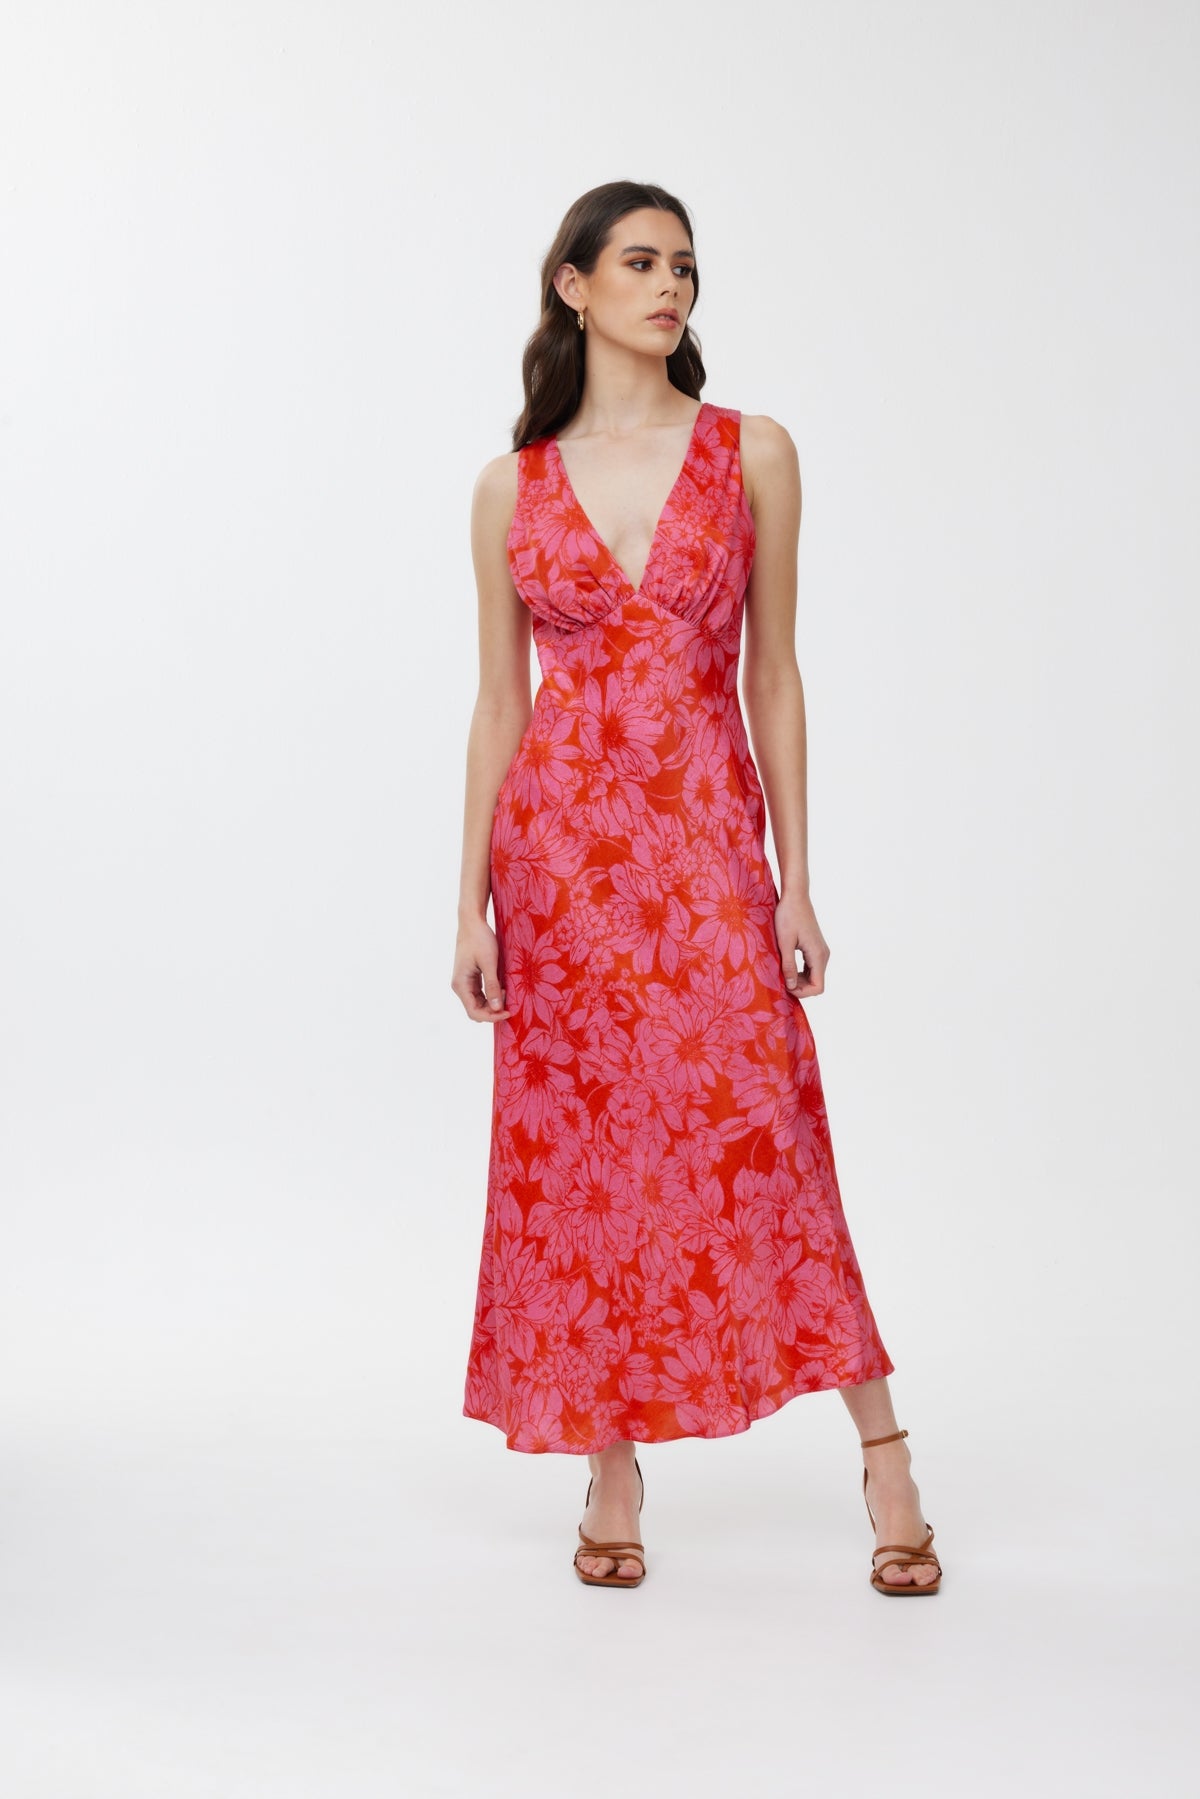 Finders - Evie Midi Dress - Hot Pink Daisy